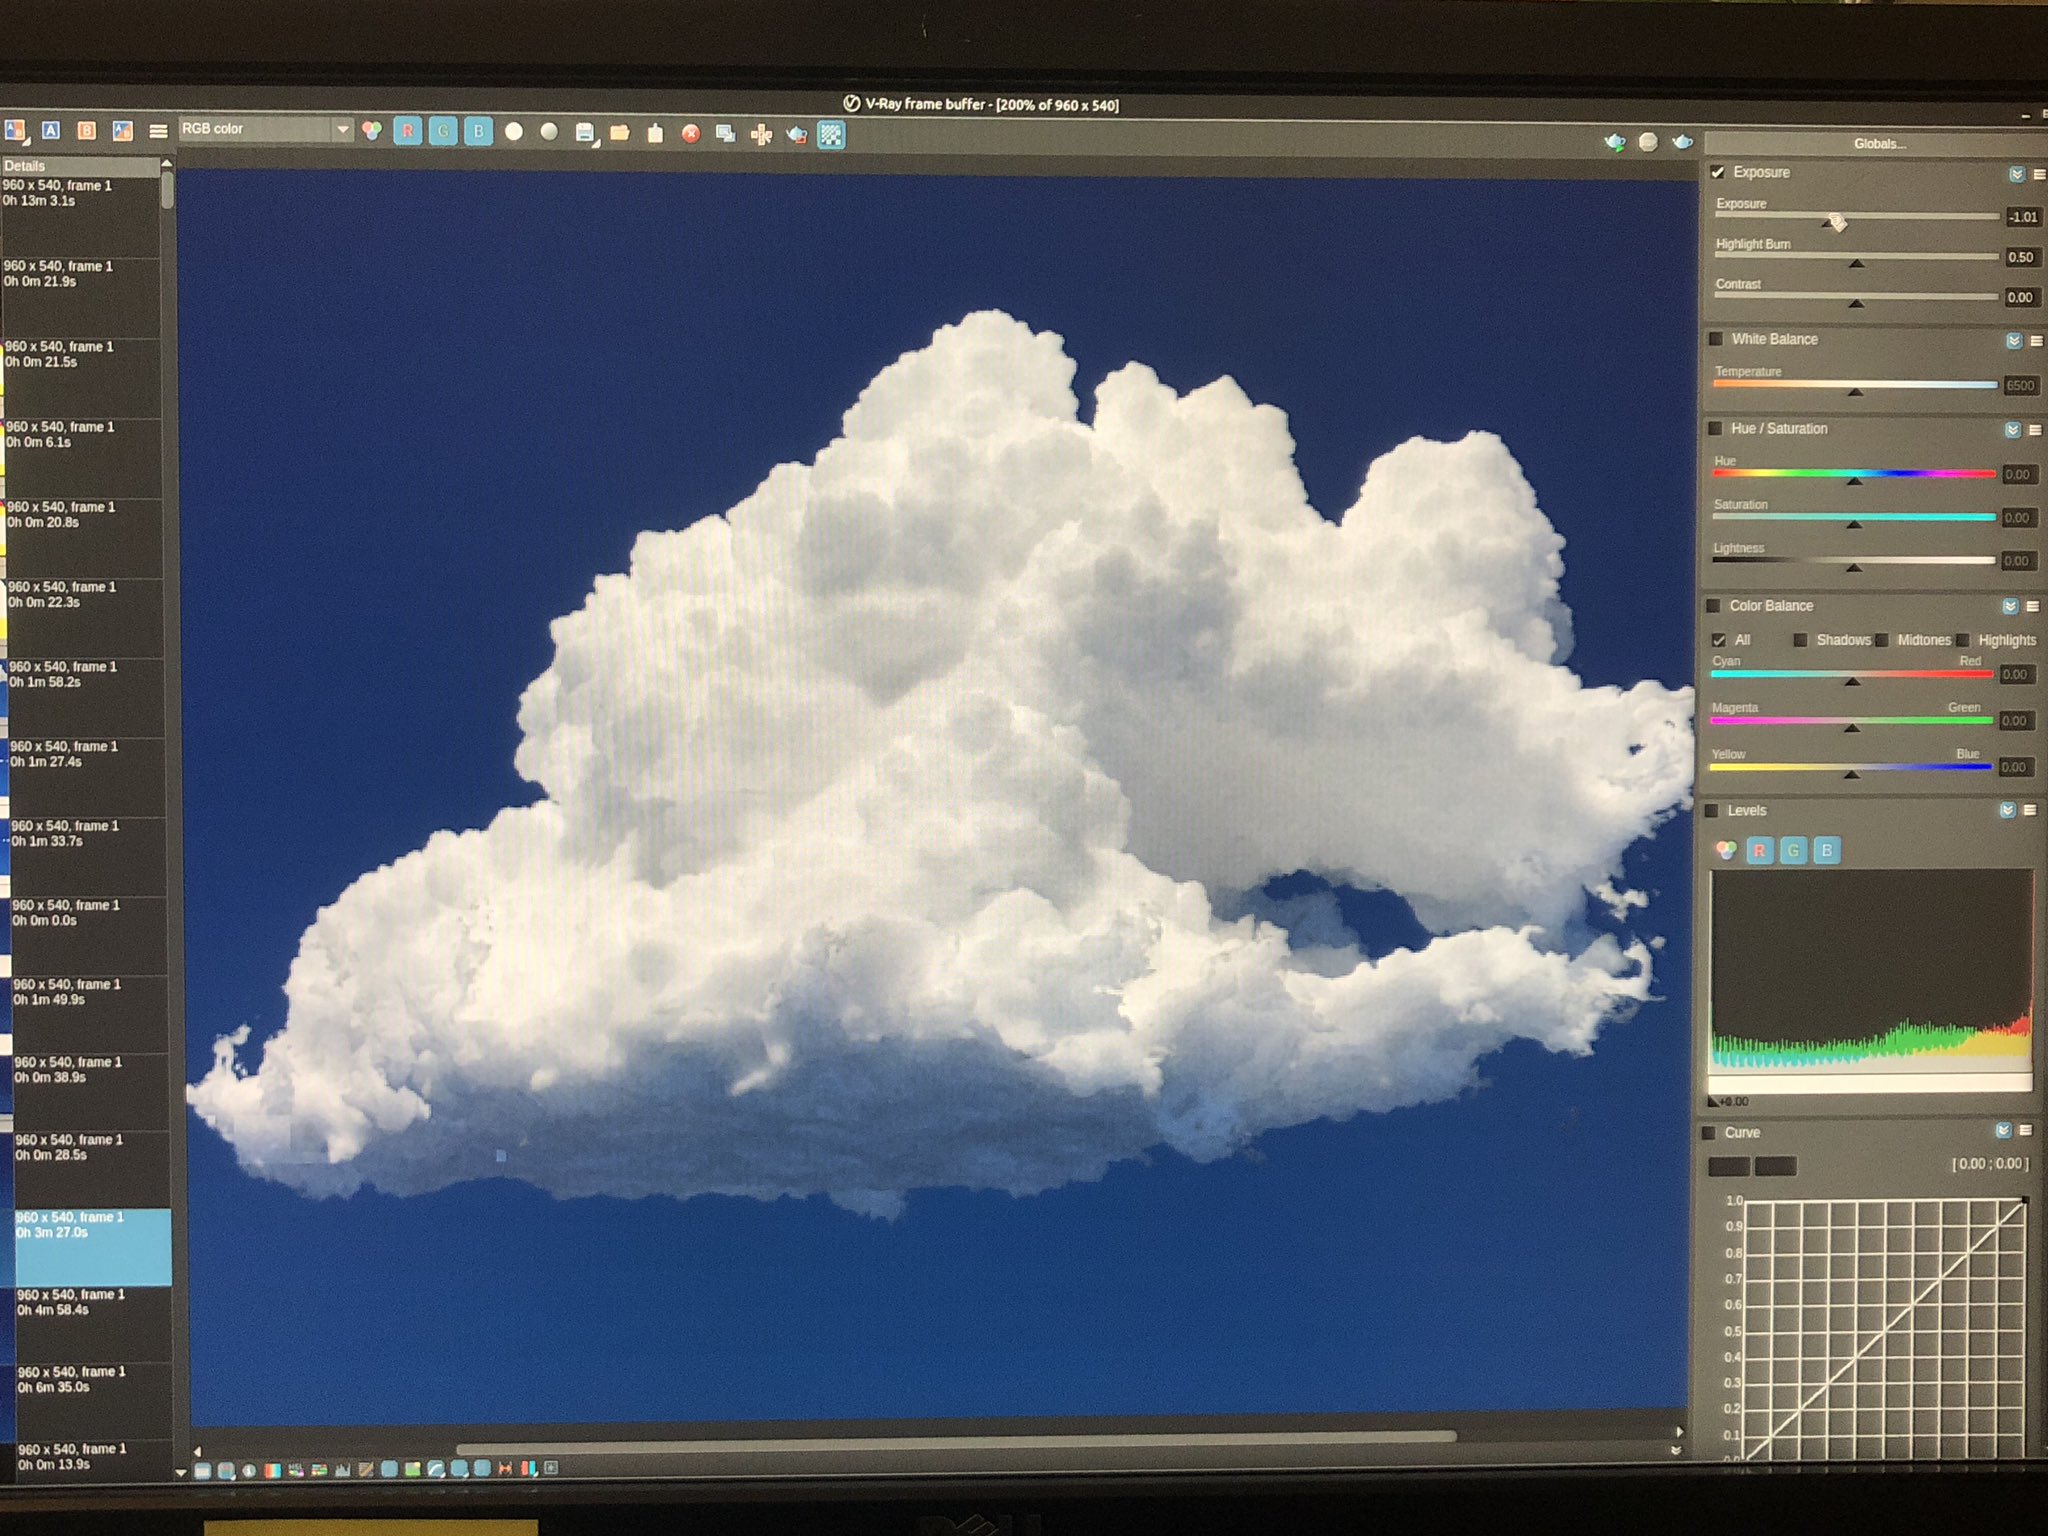 David Gruwier I Tried Rendering Disneyanimation S Cloud Asset This Is The Closest I Can Get Using Vray Subsurface Scattering Photorealistic Clouds Have Always Been On My Render Bucket List So